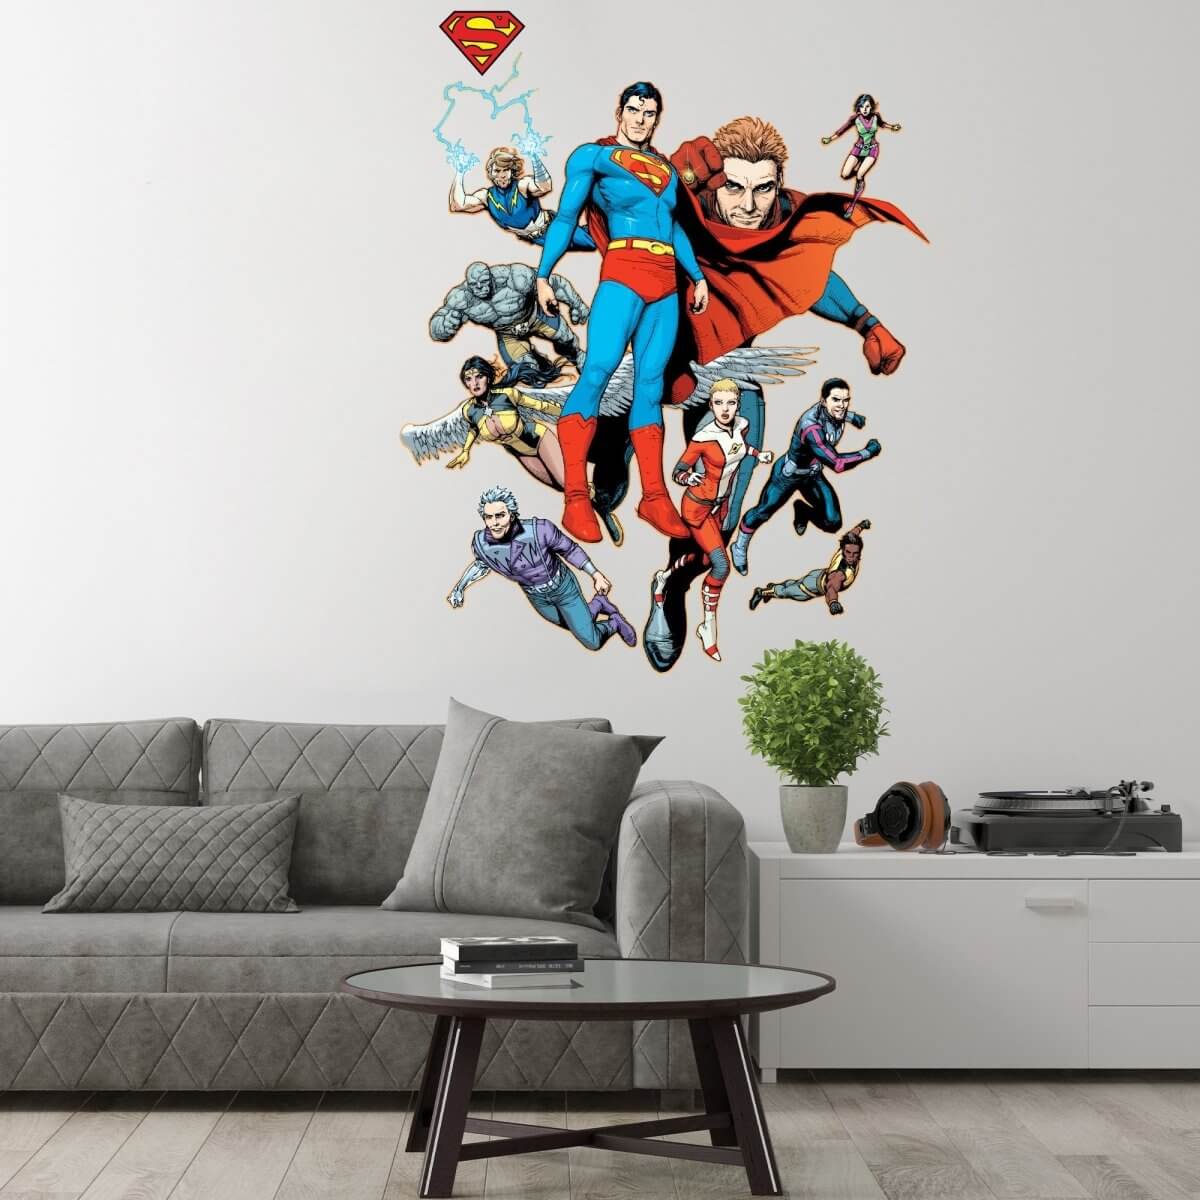 Kismet Decals Action Comics #863 Comic Cover Series Licensed Wall Sticker - Easy DIY Home & Room Decor Wall Art - Kismet Decals